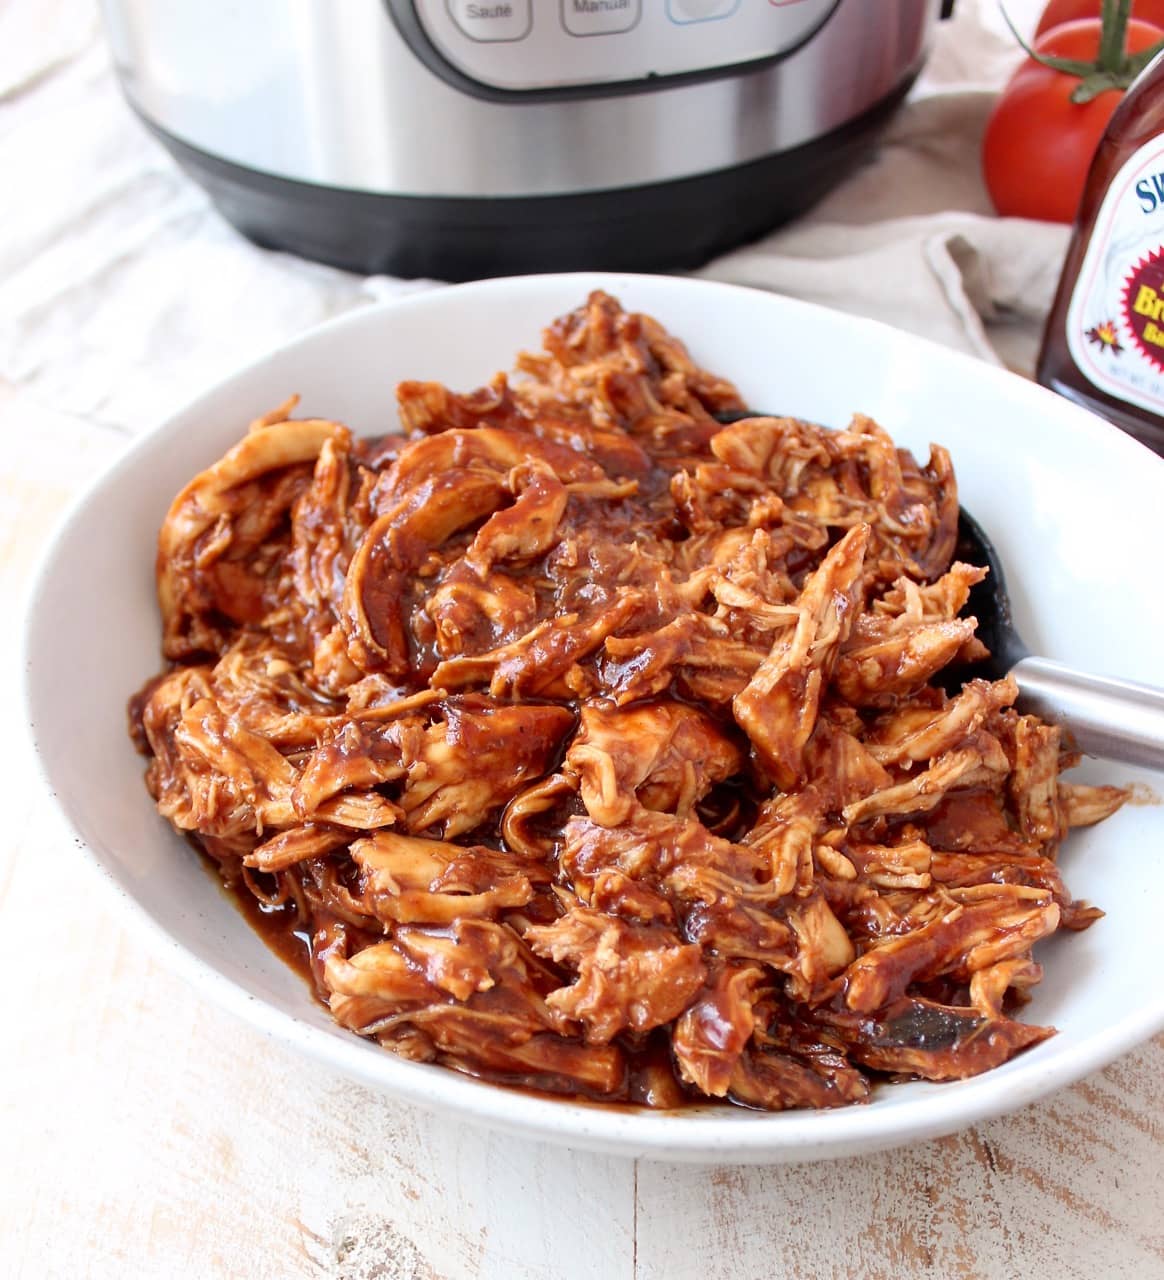 Shredded BBQ chicken in a white bowl with a spoon.